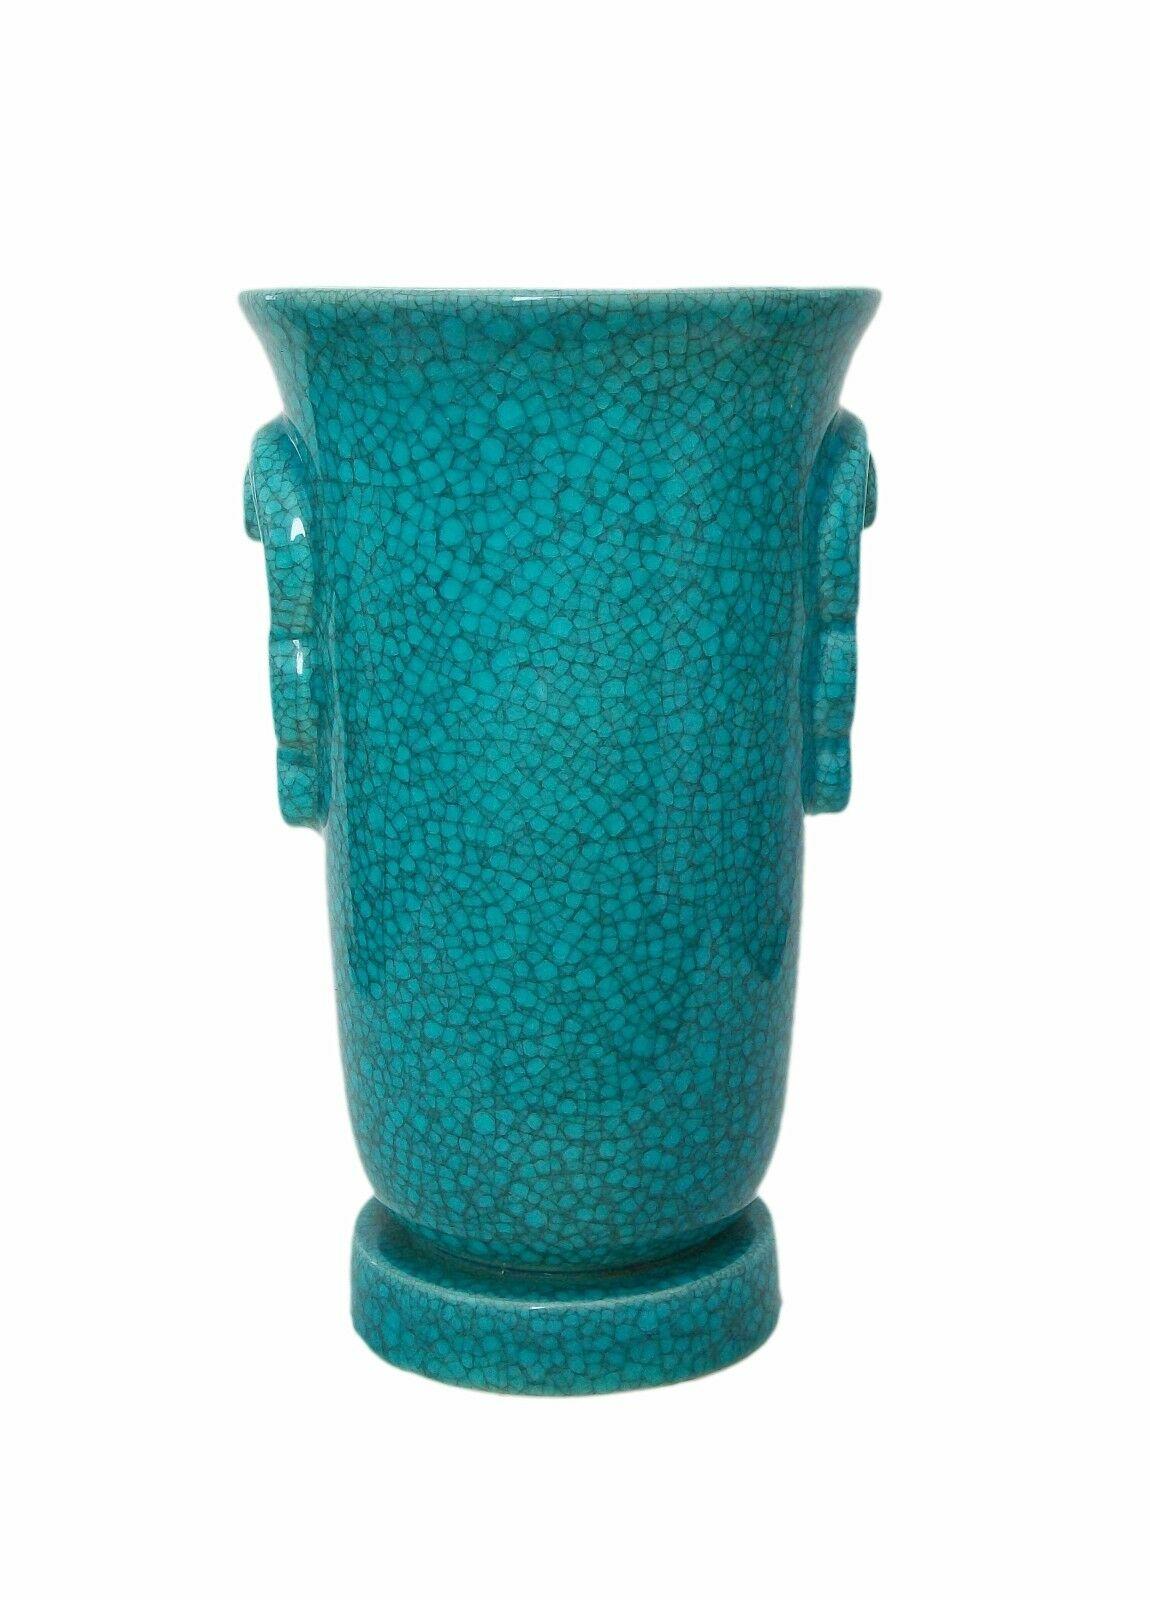 Art Deco Turquoise Crackle Glaze Vase, Belgium, Circa 1930's In Good Condition For Sale In Chatham, ON